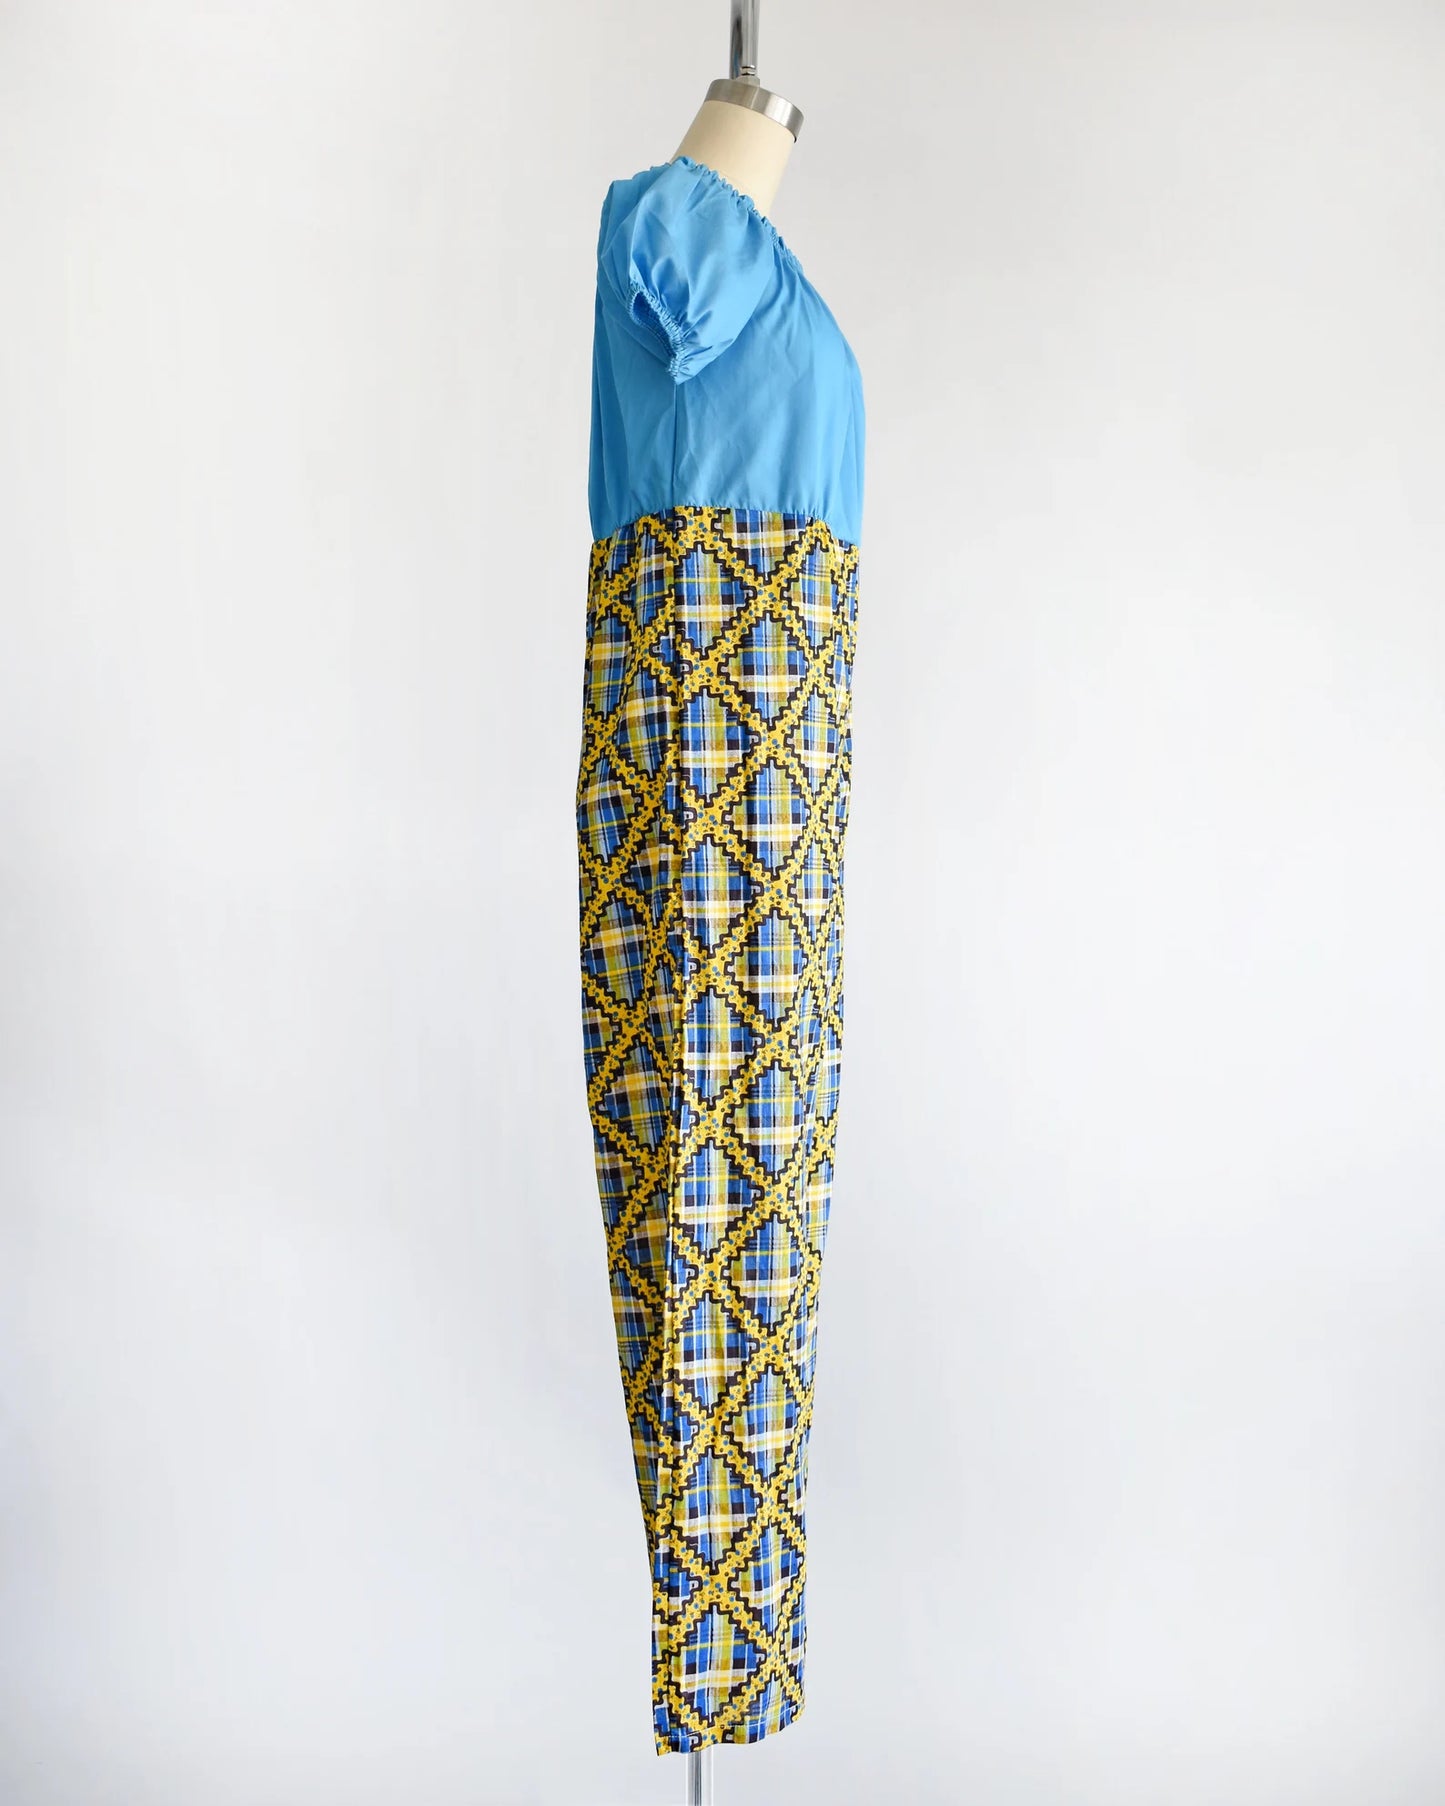 Side view of a vintage 70s jumpsuit that has a blue bodice with smocked elastic neckline and puff sleeves. The pants are a blue, black, and yellow plaid, with a ric-rac dotted yellow and black print on top of the plaid.